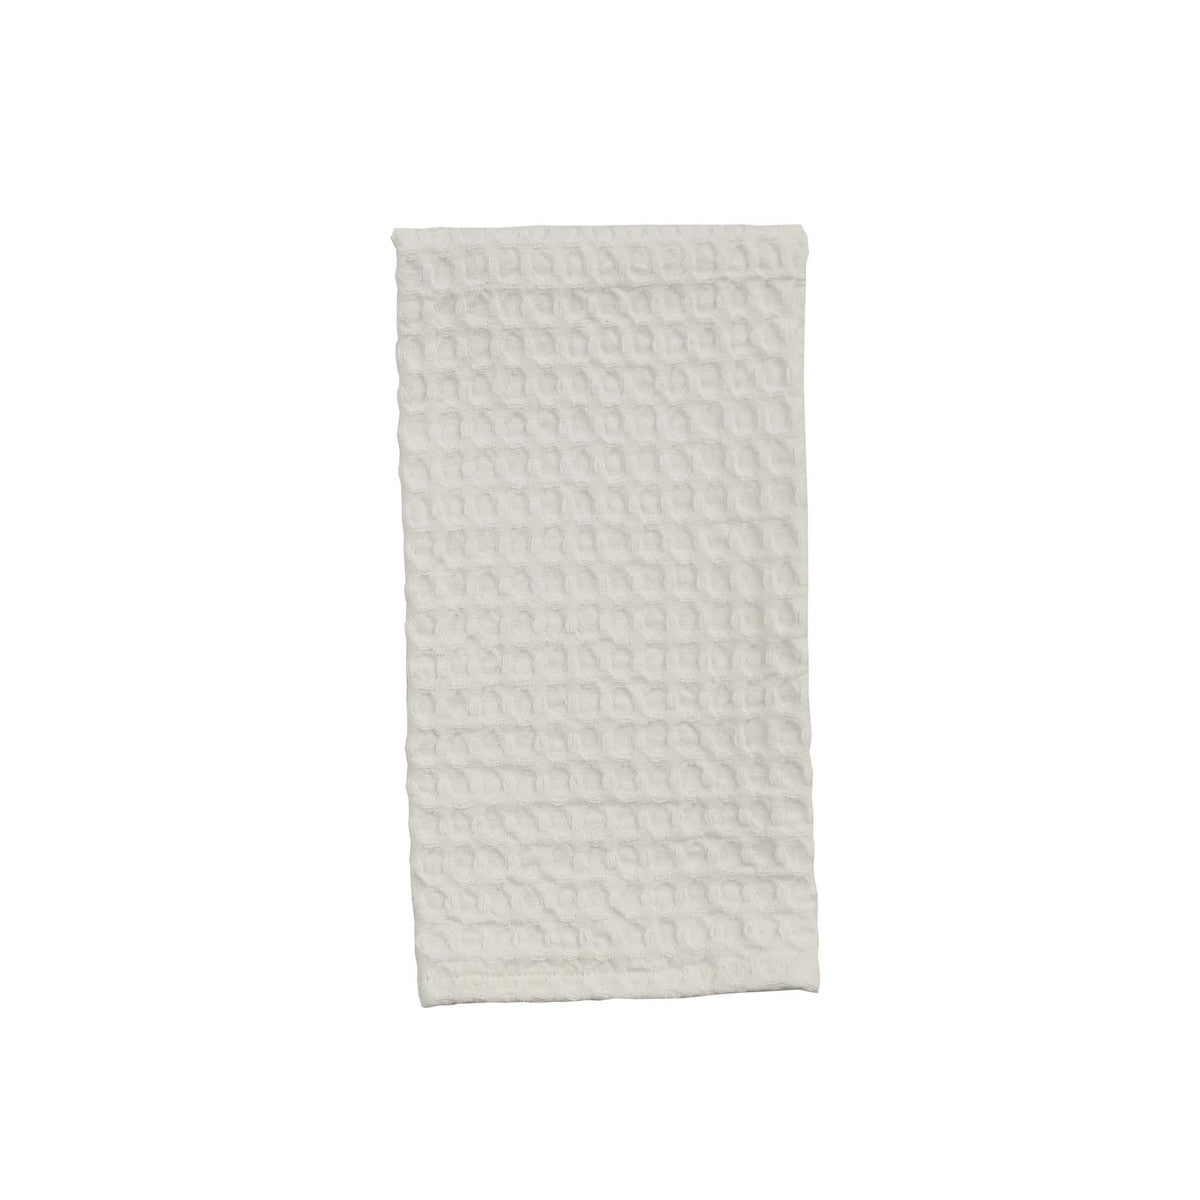 Waffle Weave Towel Bleached White Set of 2  Park Designs